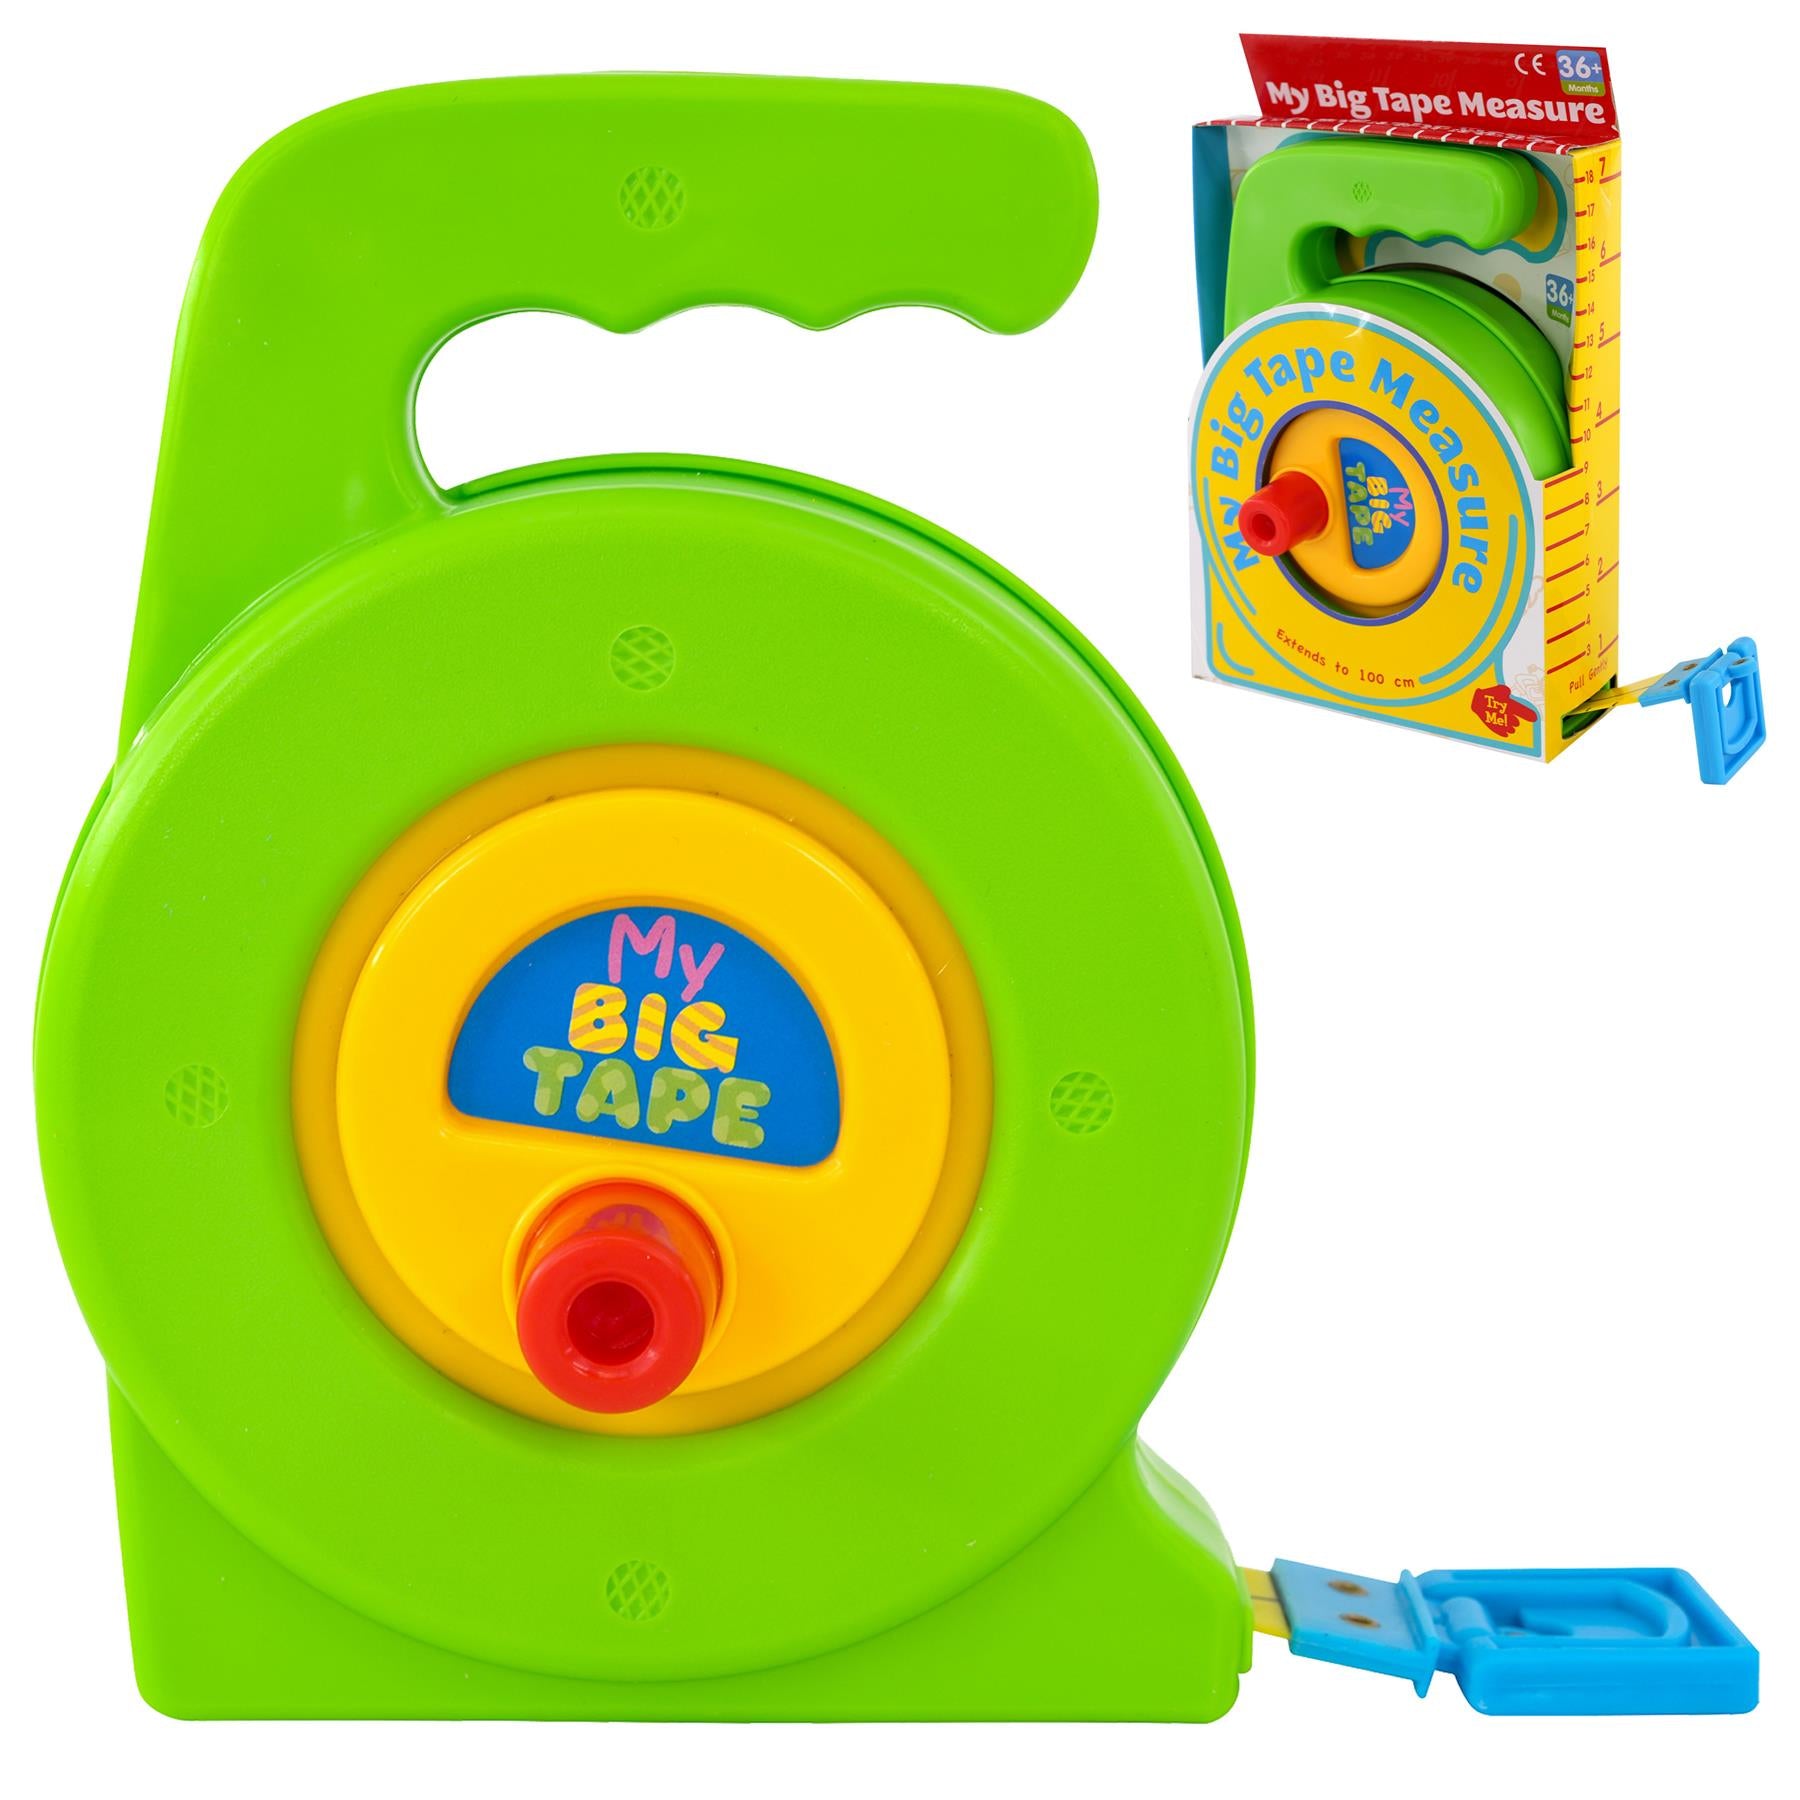 Tape Measure Toy - Green - Tape Measure Toy - Kids Tape Measure Toy -  Plastic - The Magic Toy Shop